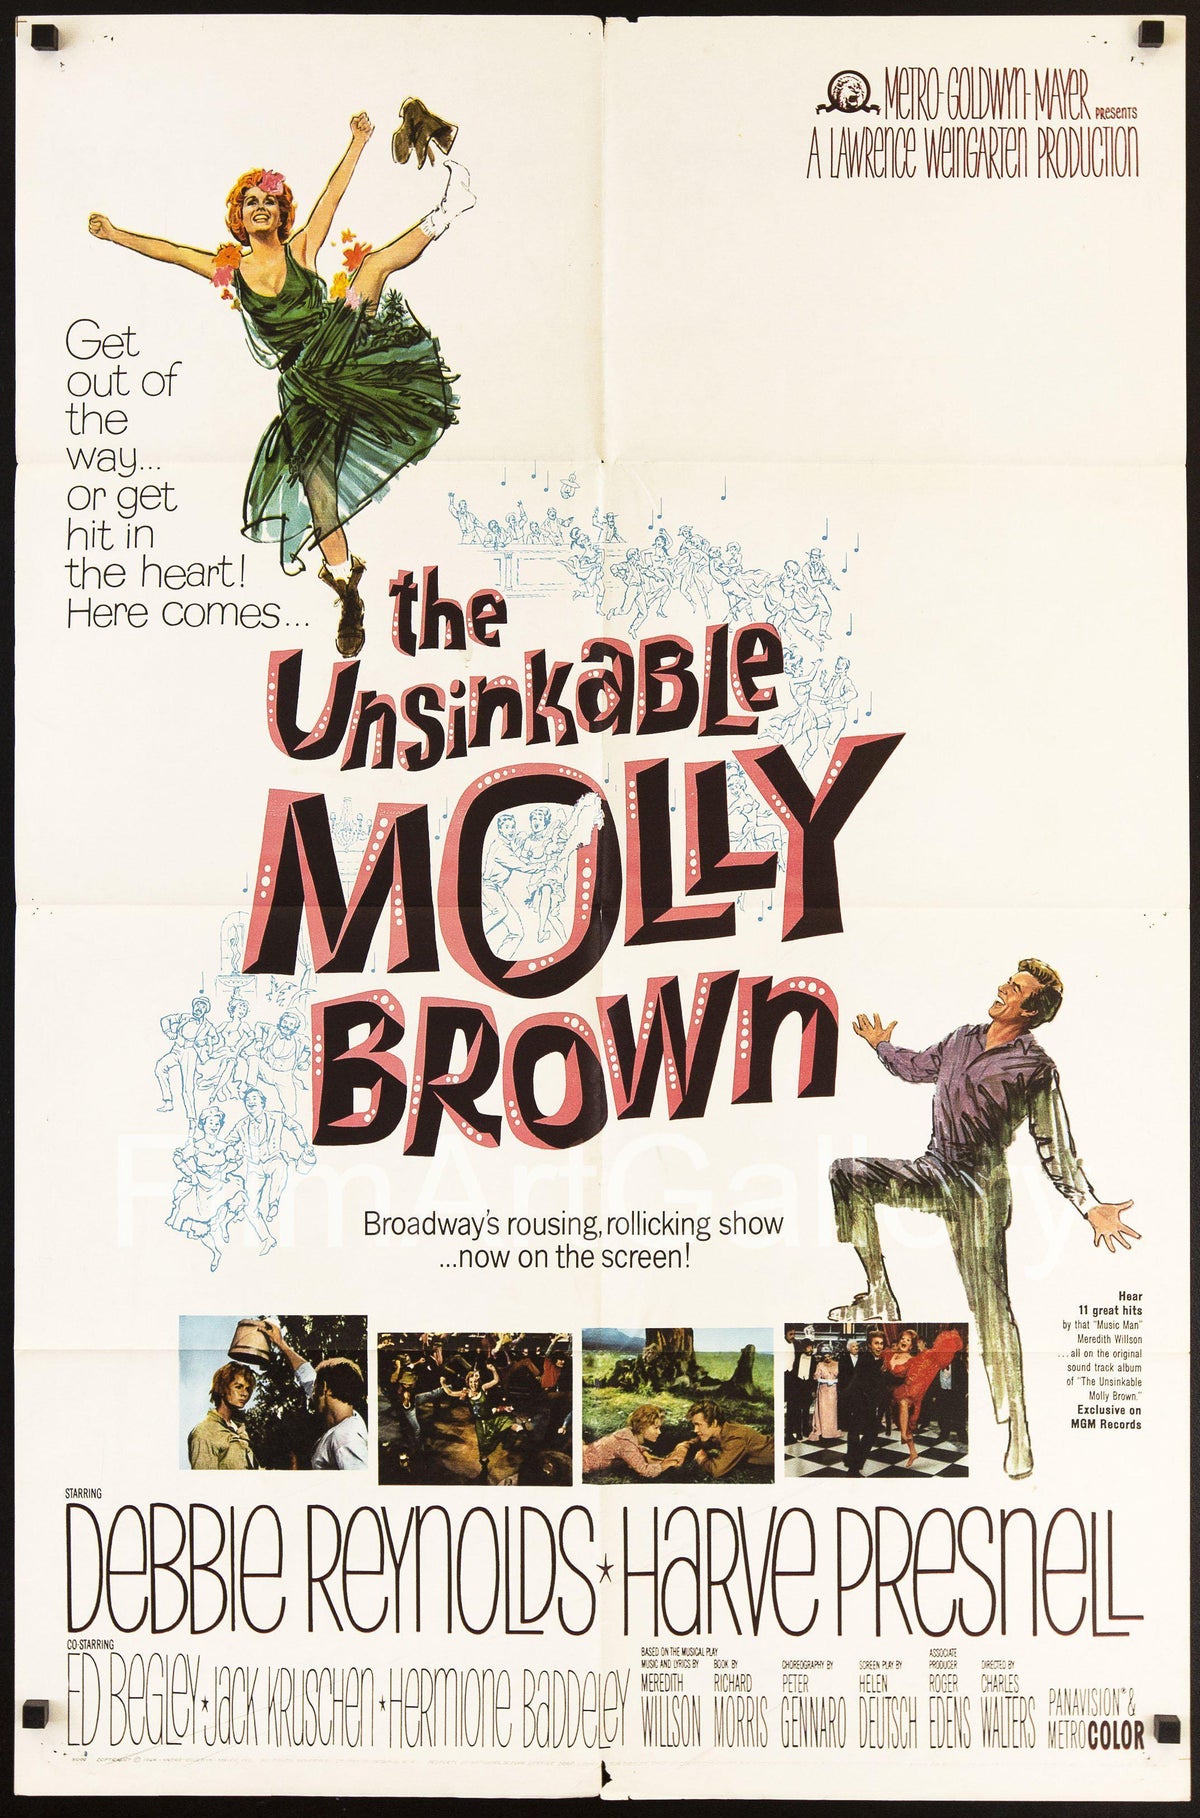 The Unsinkable Molly Brown 1 Sheet (27x41) Original Vintage Movie Poster